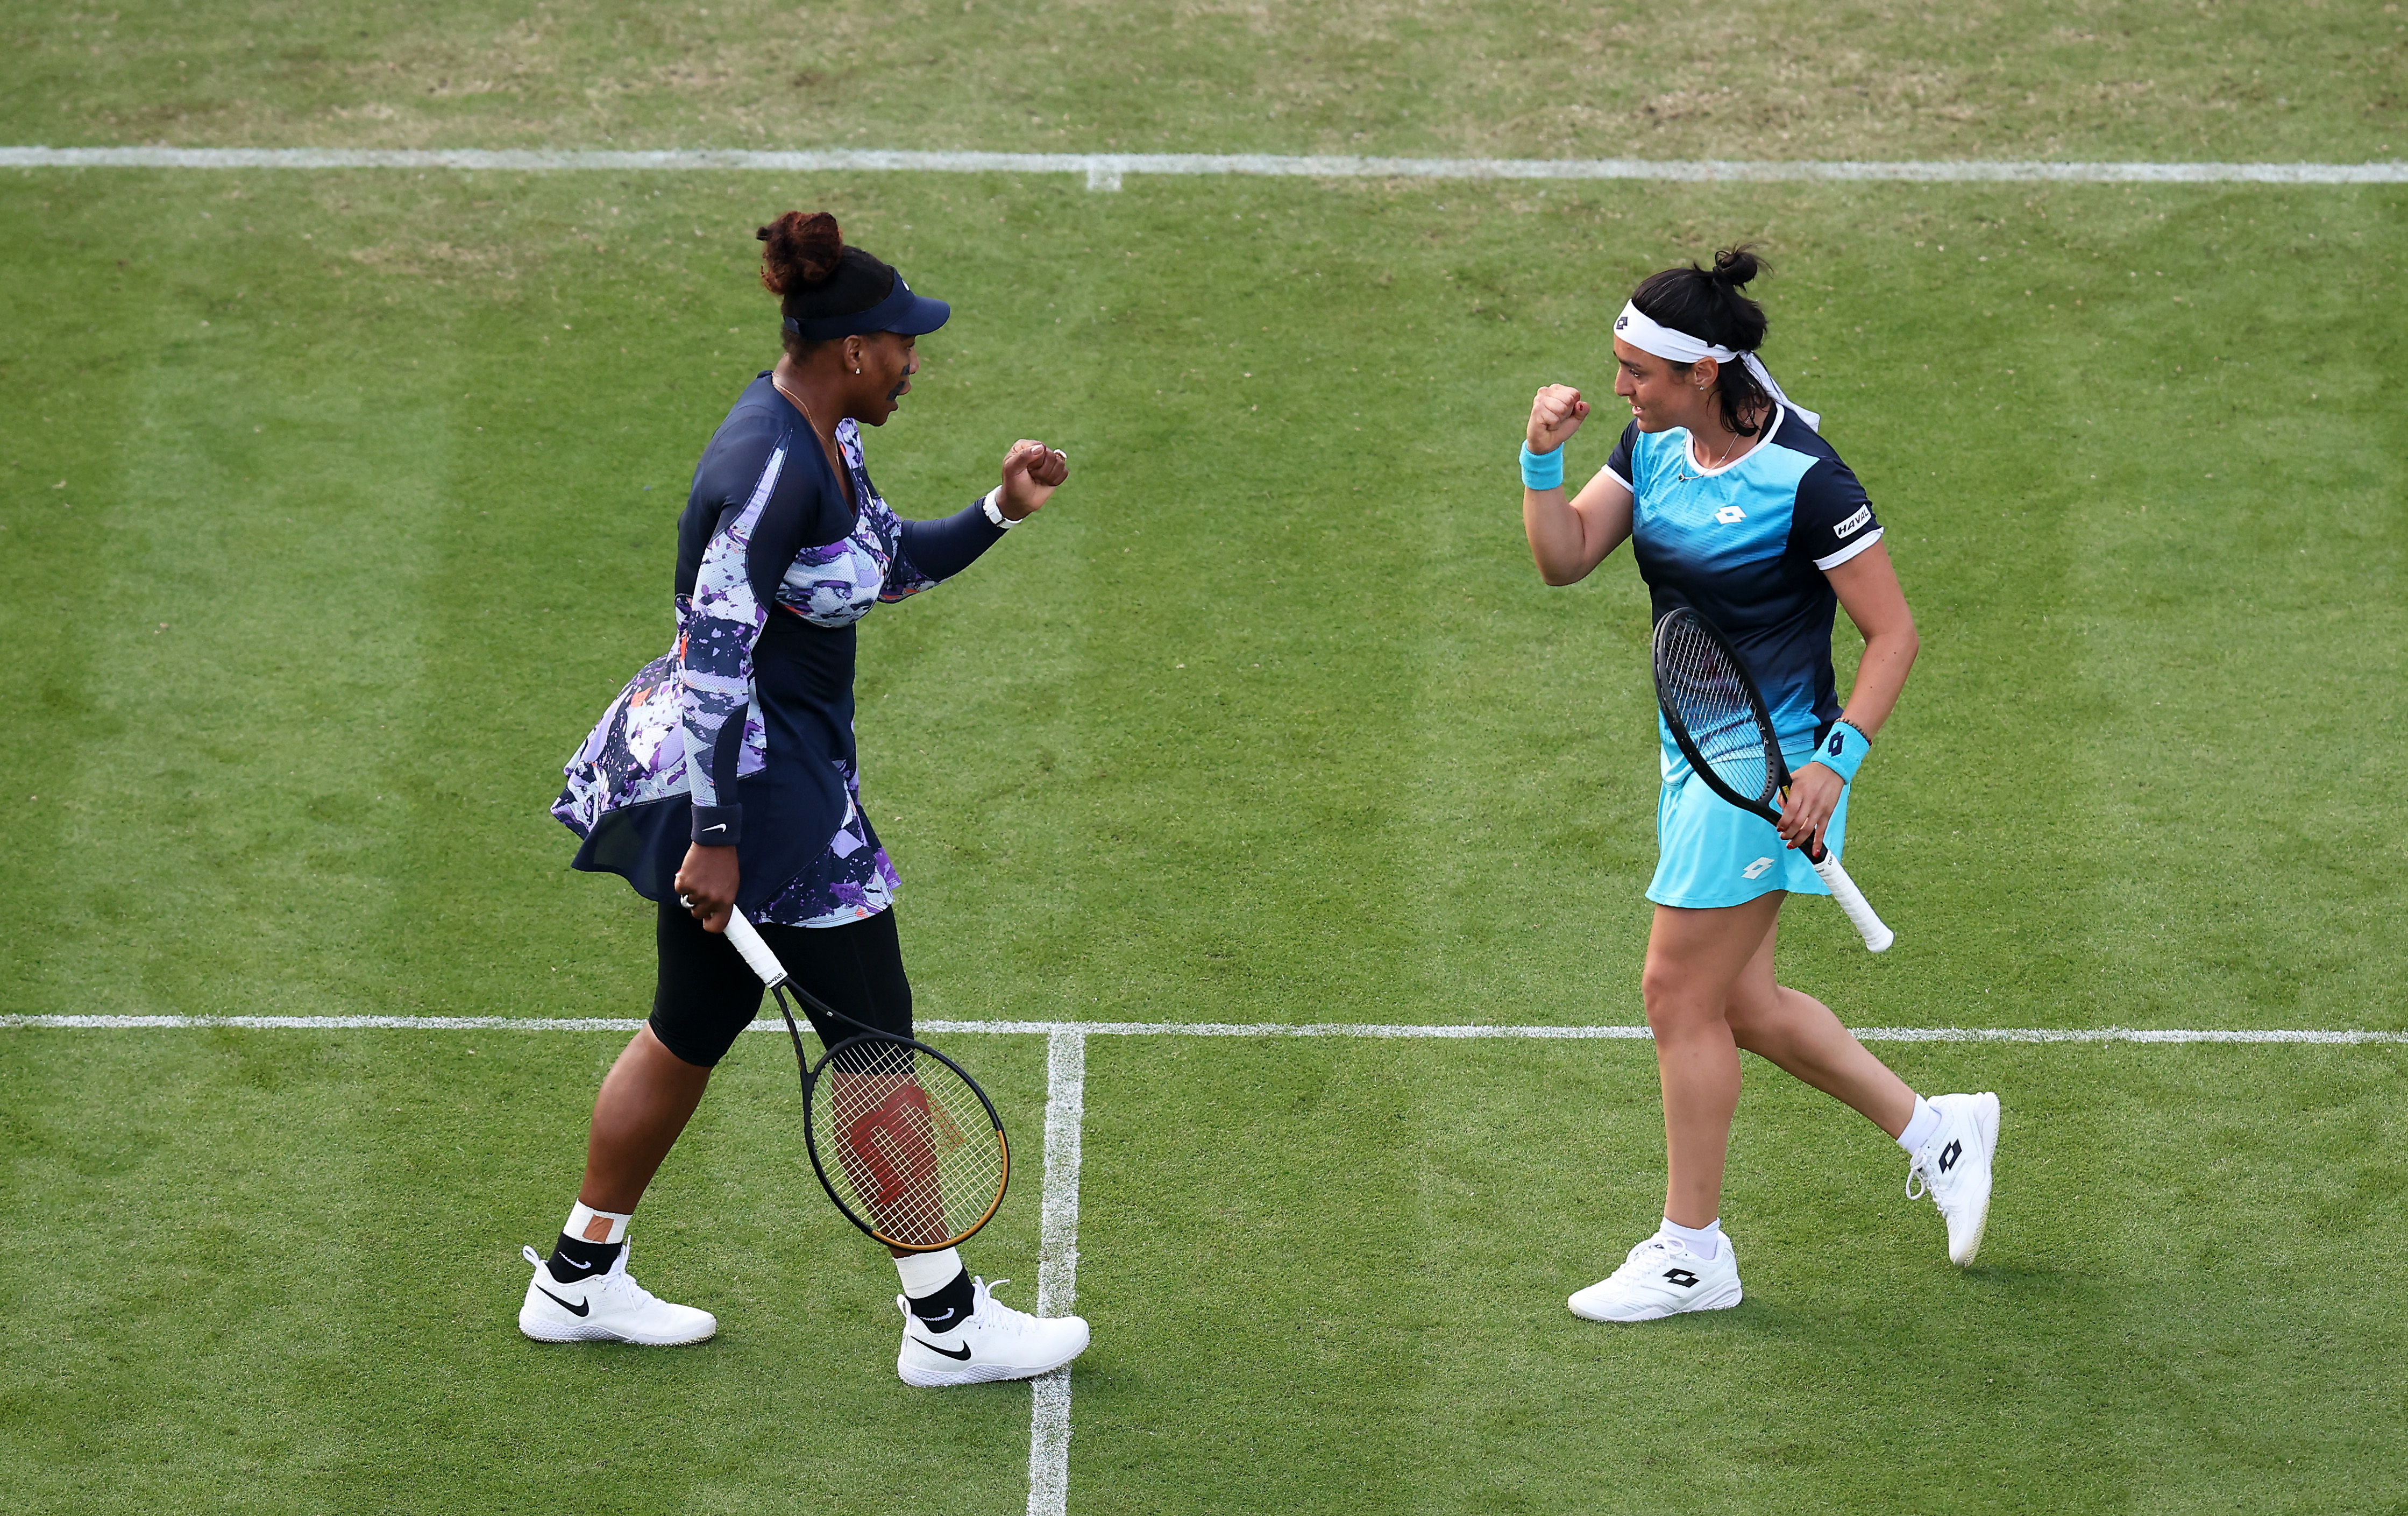 Serena Williams of USA interacts with Ons Jabeur of Tunisia during their Doubles match against Sara Sorribes Tormo of Spain and Marie Bouzková of Czech Republic during Day Four of the Rothesay International Eastbourne at Devonshire Park on June 21, 2022 in Eastbourne, England. (Photo by Charlie Crowhurst/Getty Images for LTA)